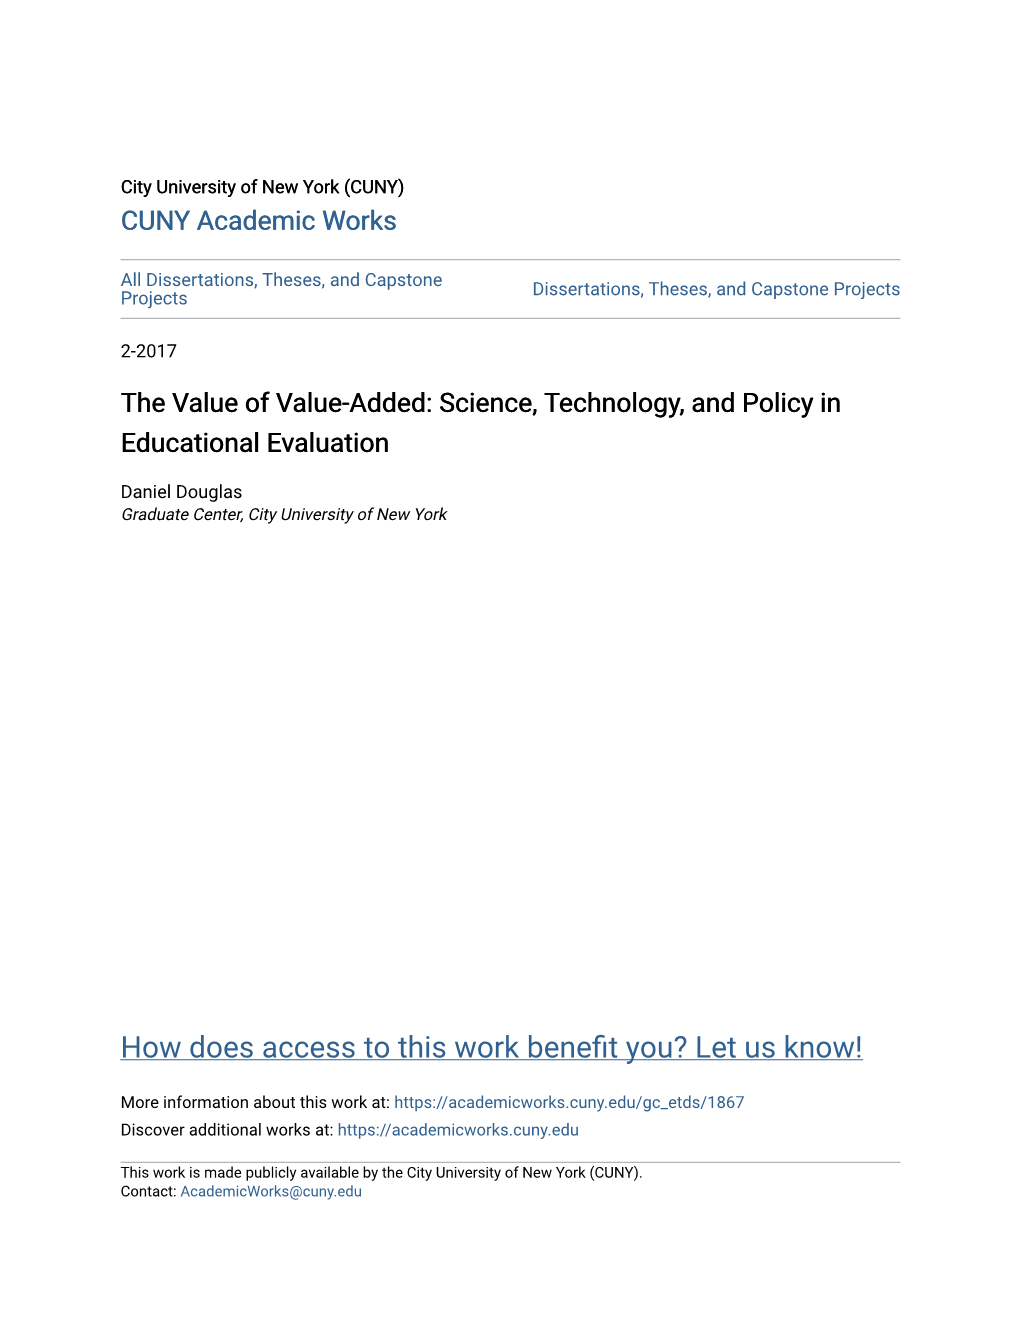 Science, Technology, and Policy in Educational Evaluation